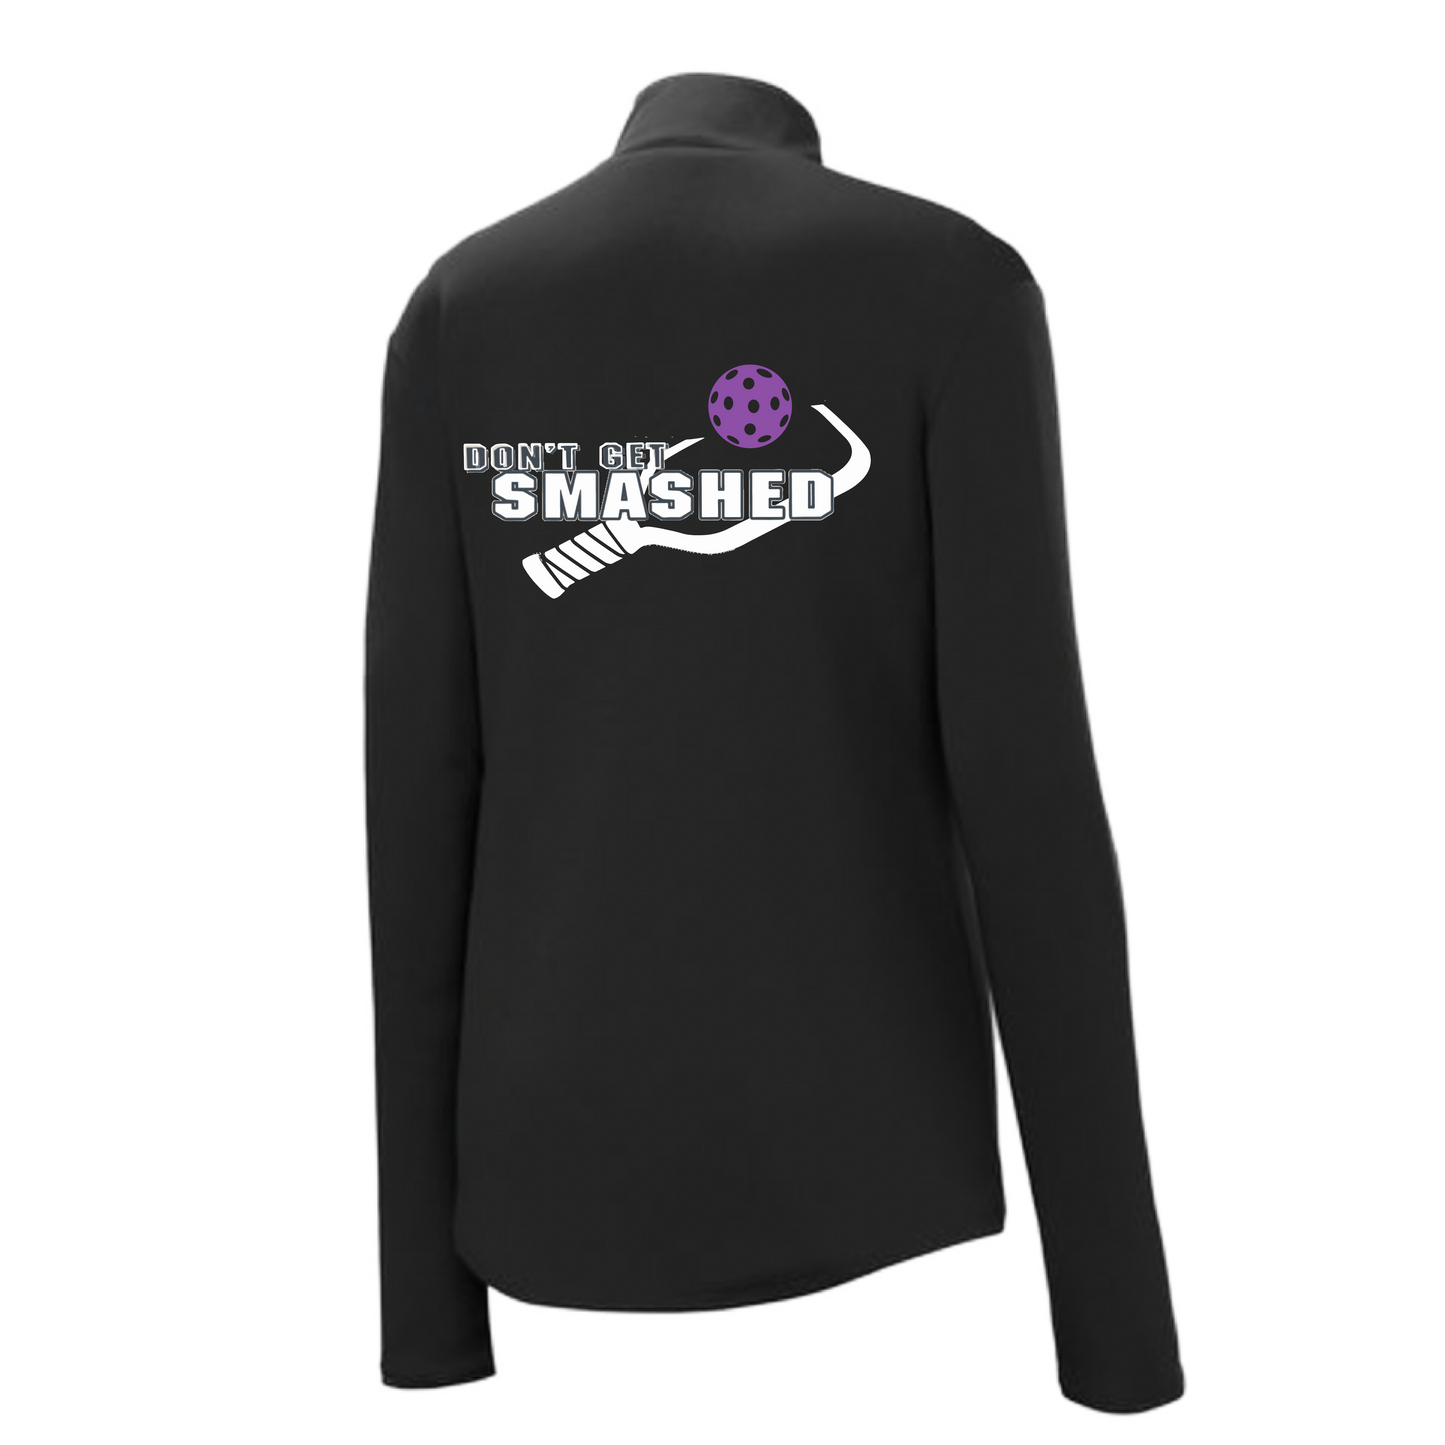 Don't Get Smashed (Pickleball Color Purple White Yellow) | Women's 1/4 Zip Pullover Athletic Shirt | 100% Polyester